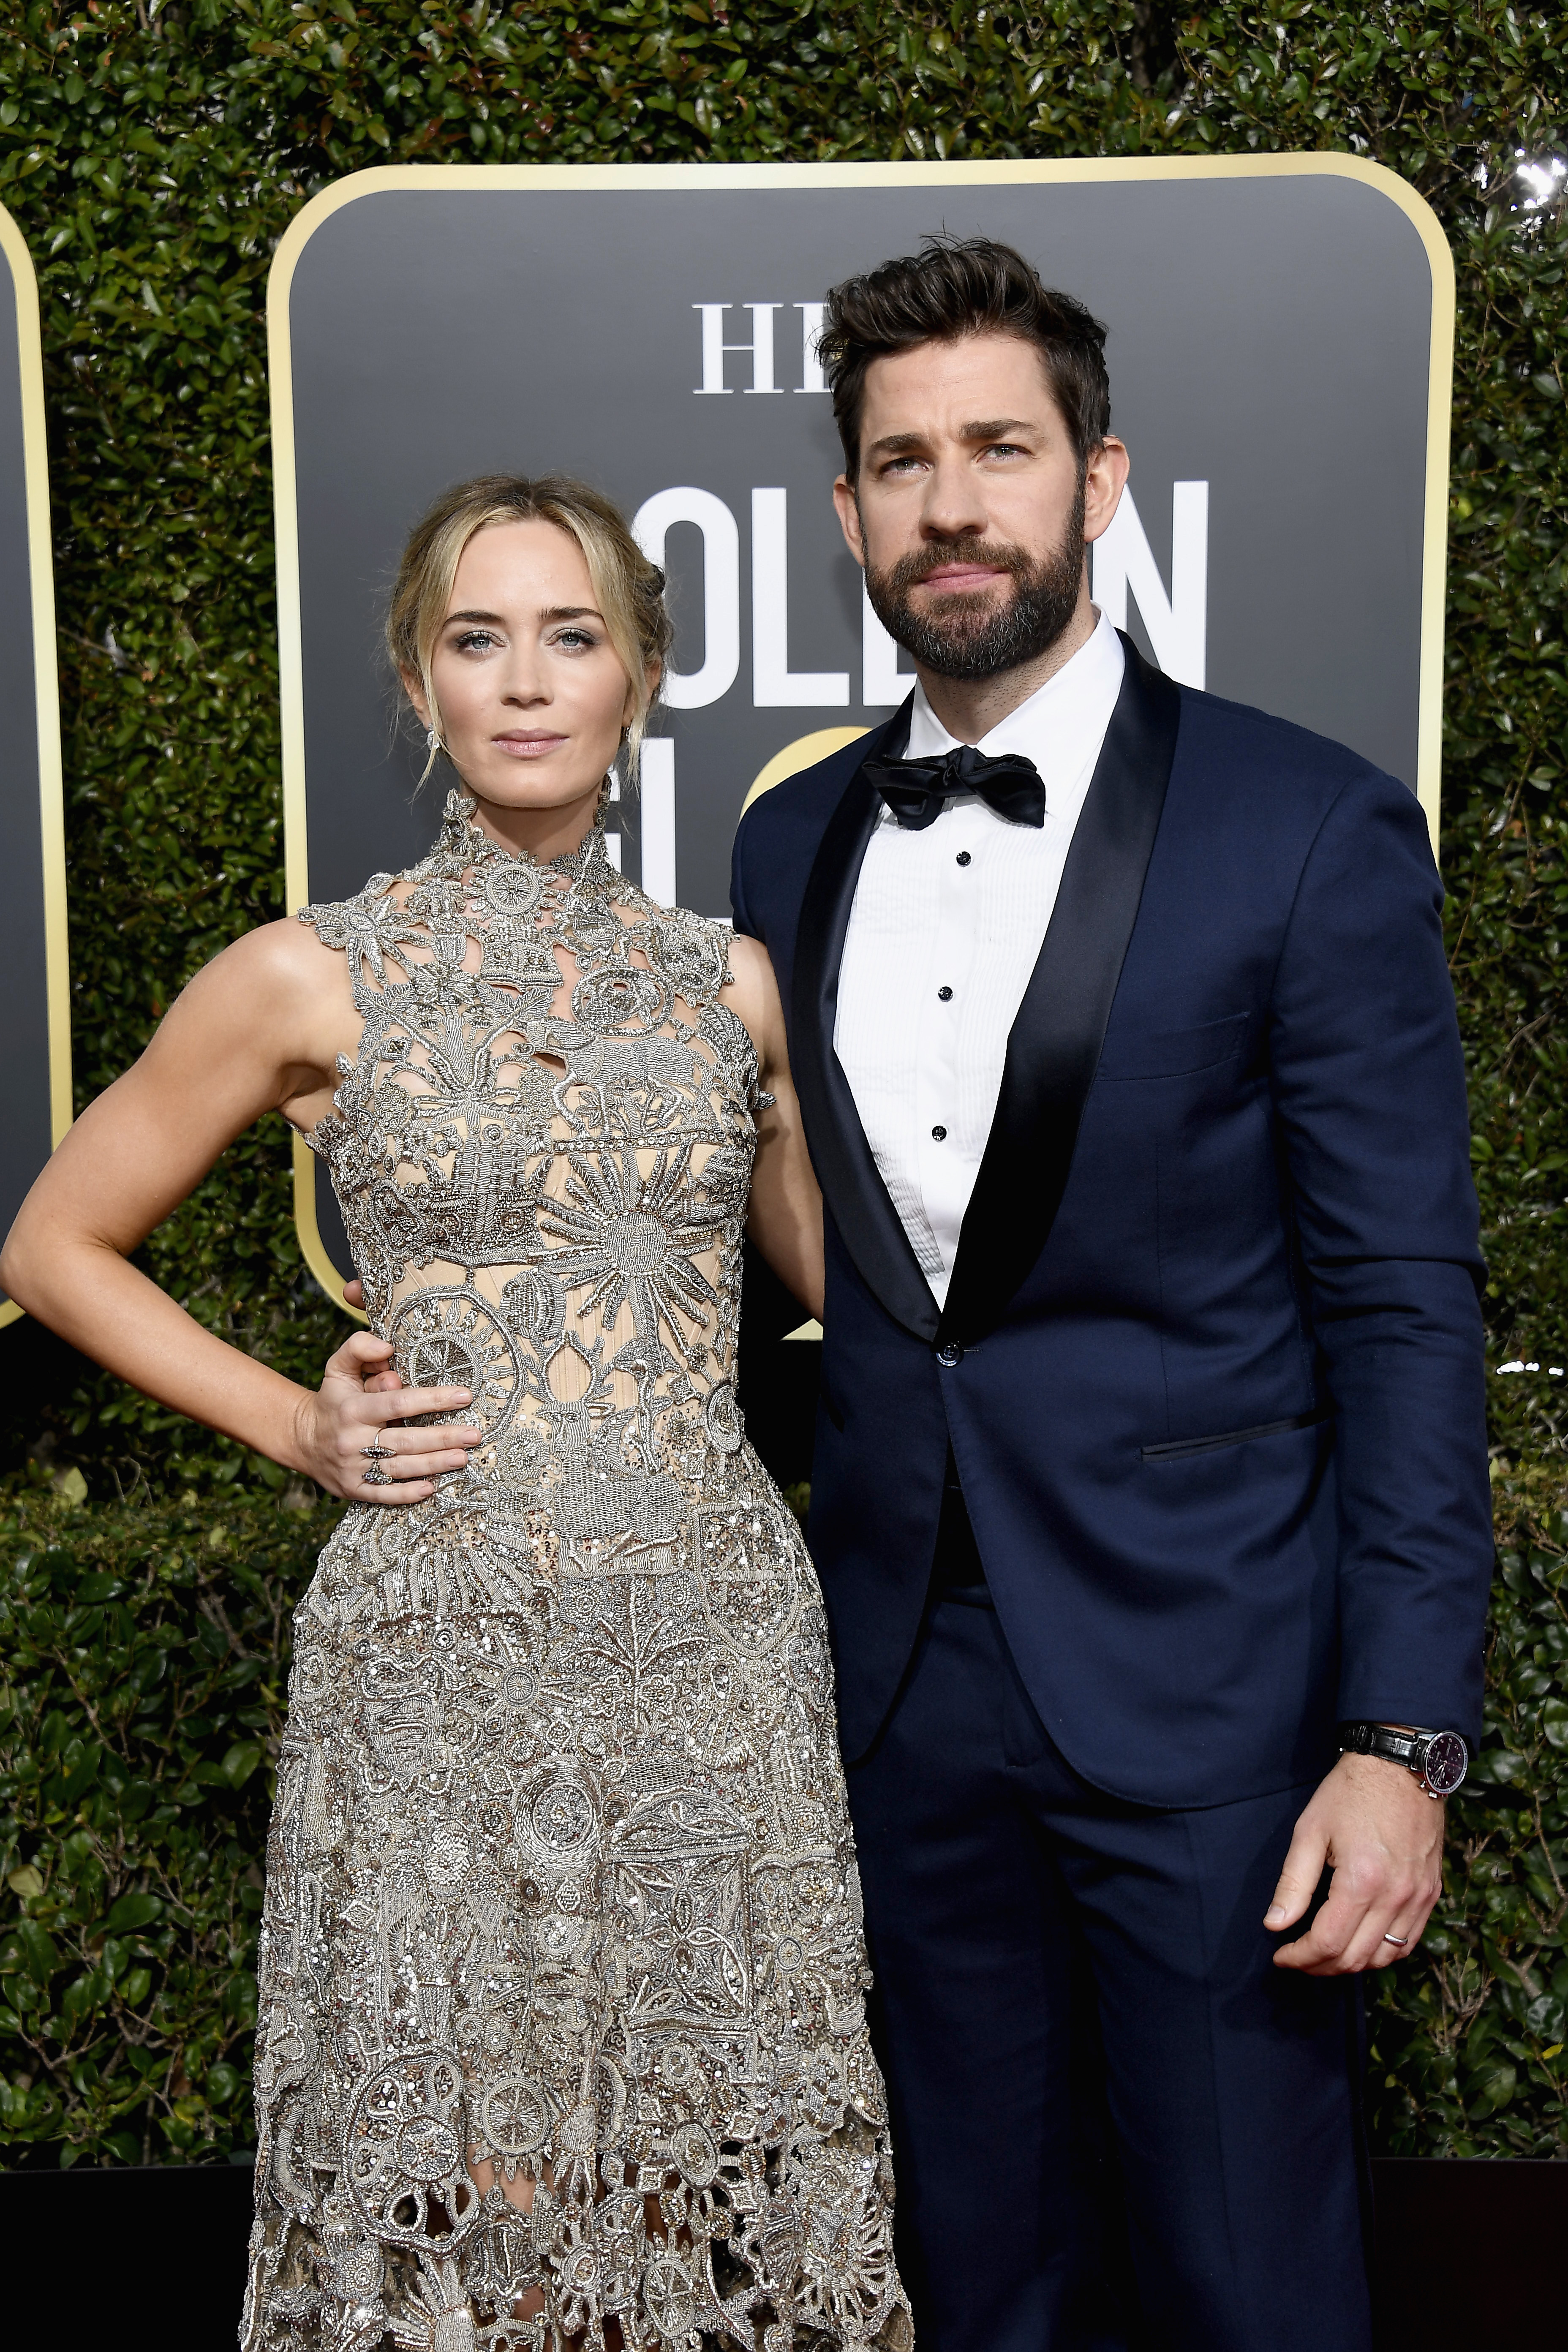 Emily Blunt and John Krasinski arrive to the 76th Annual Golden Globe Awards held at the Beverly Hilton Hotel on January 6, 2019. | Source: Getty Images